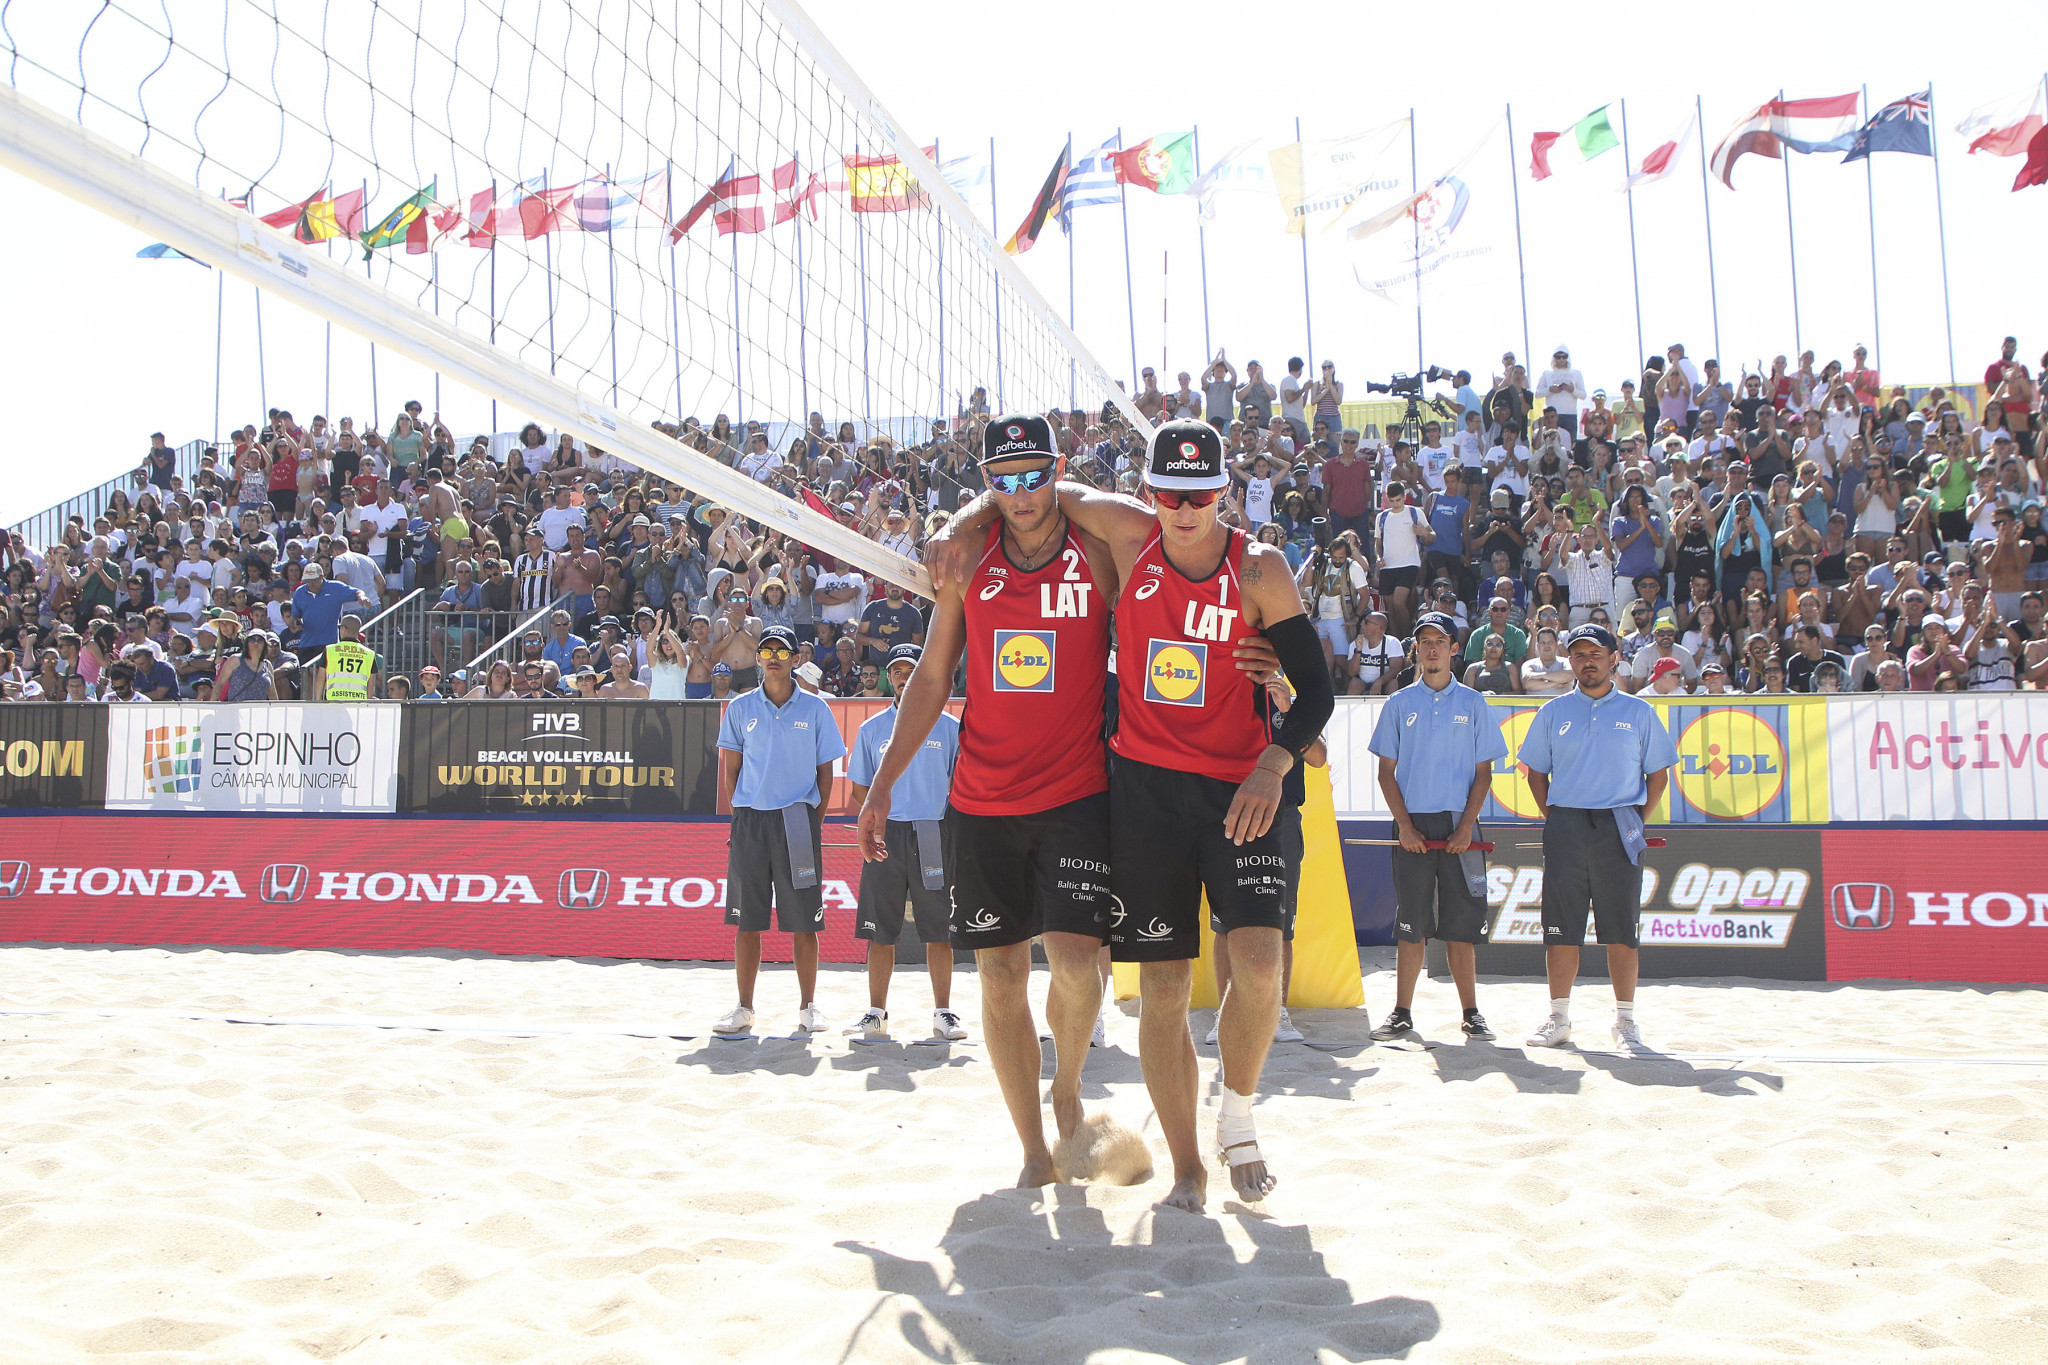 Latvia's Martins Plavins played through the pain as he partnered Edgars Tocs to the bronze medal ©FIVB